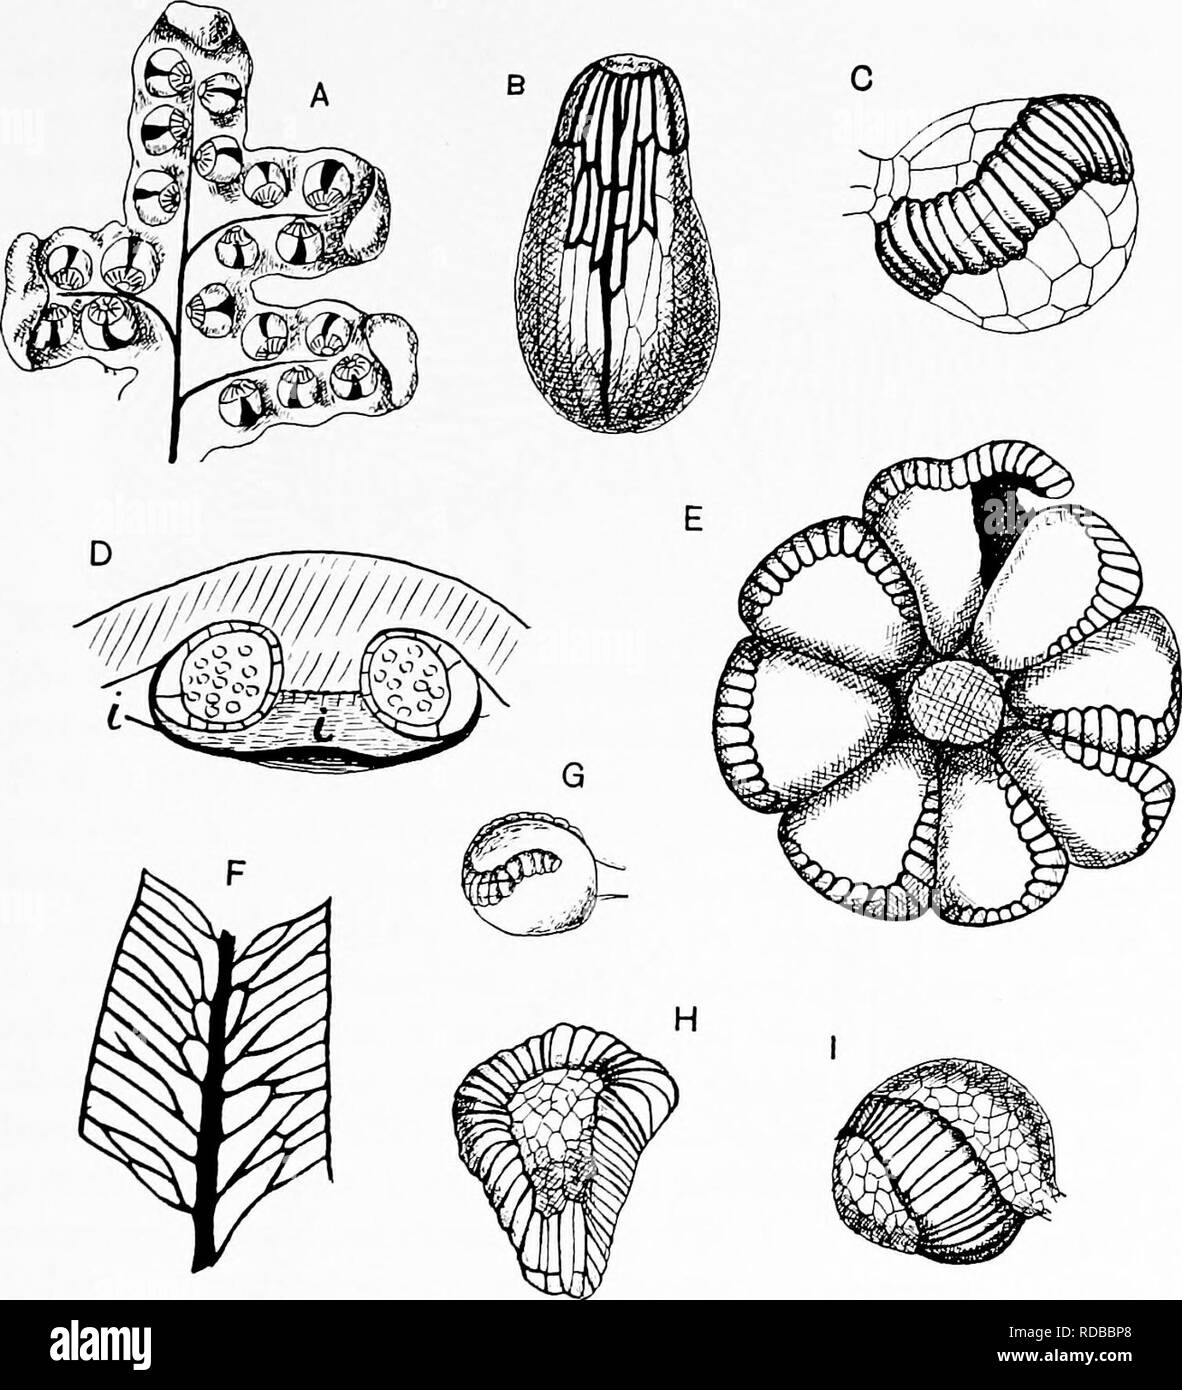 . Fossil plants : for students of botany and geology . Paleobotany. xx] GLEICHENIACEAE 289 semi-circular in form (fig. 226, C), in others (sect. Mertensia') the segments are linear (fig. 226, D), and in many species the fronds are distinguished by the regular dichotomous branching. Fio. 224. A. Aneimia flexuosa. B. A. phyllitidis. C. Hymeiwphyllum dilatatum. D. E, F, G. Matonia pectinata; i, indusium. H. Thyrsopteris elegans. I. Gleichenia circinata. (A, B, after Prantl; C, G, H, I, after Bower.) 1 Underwood (07), p. 243, has adopted Bernhardi's genus Dicranopteria in place of Mertensia on the Stock Photo